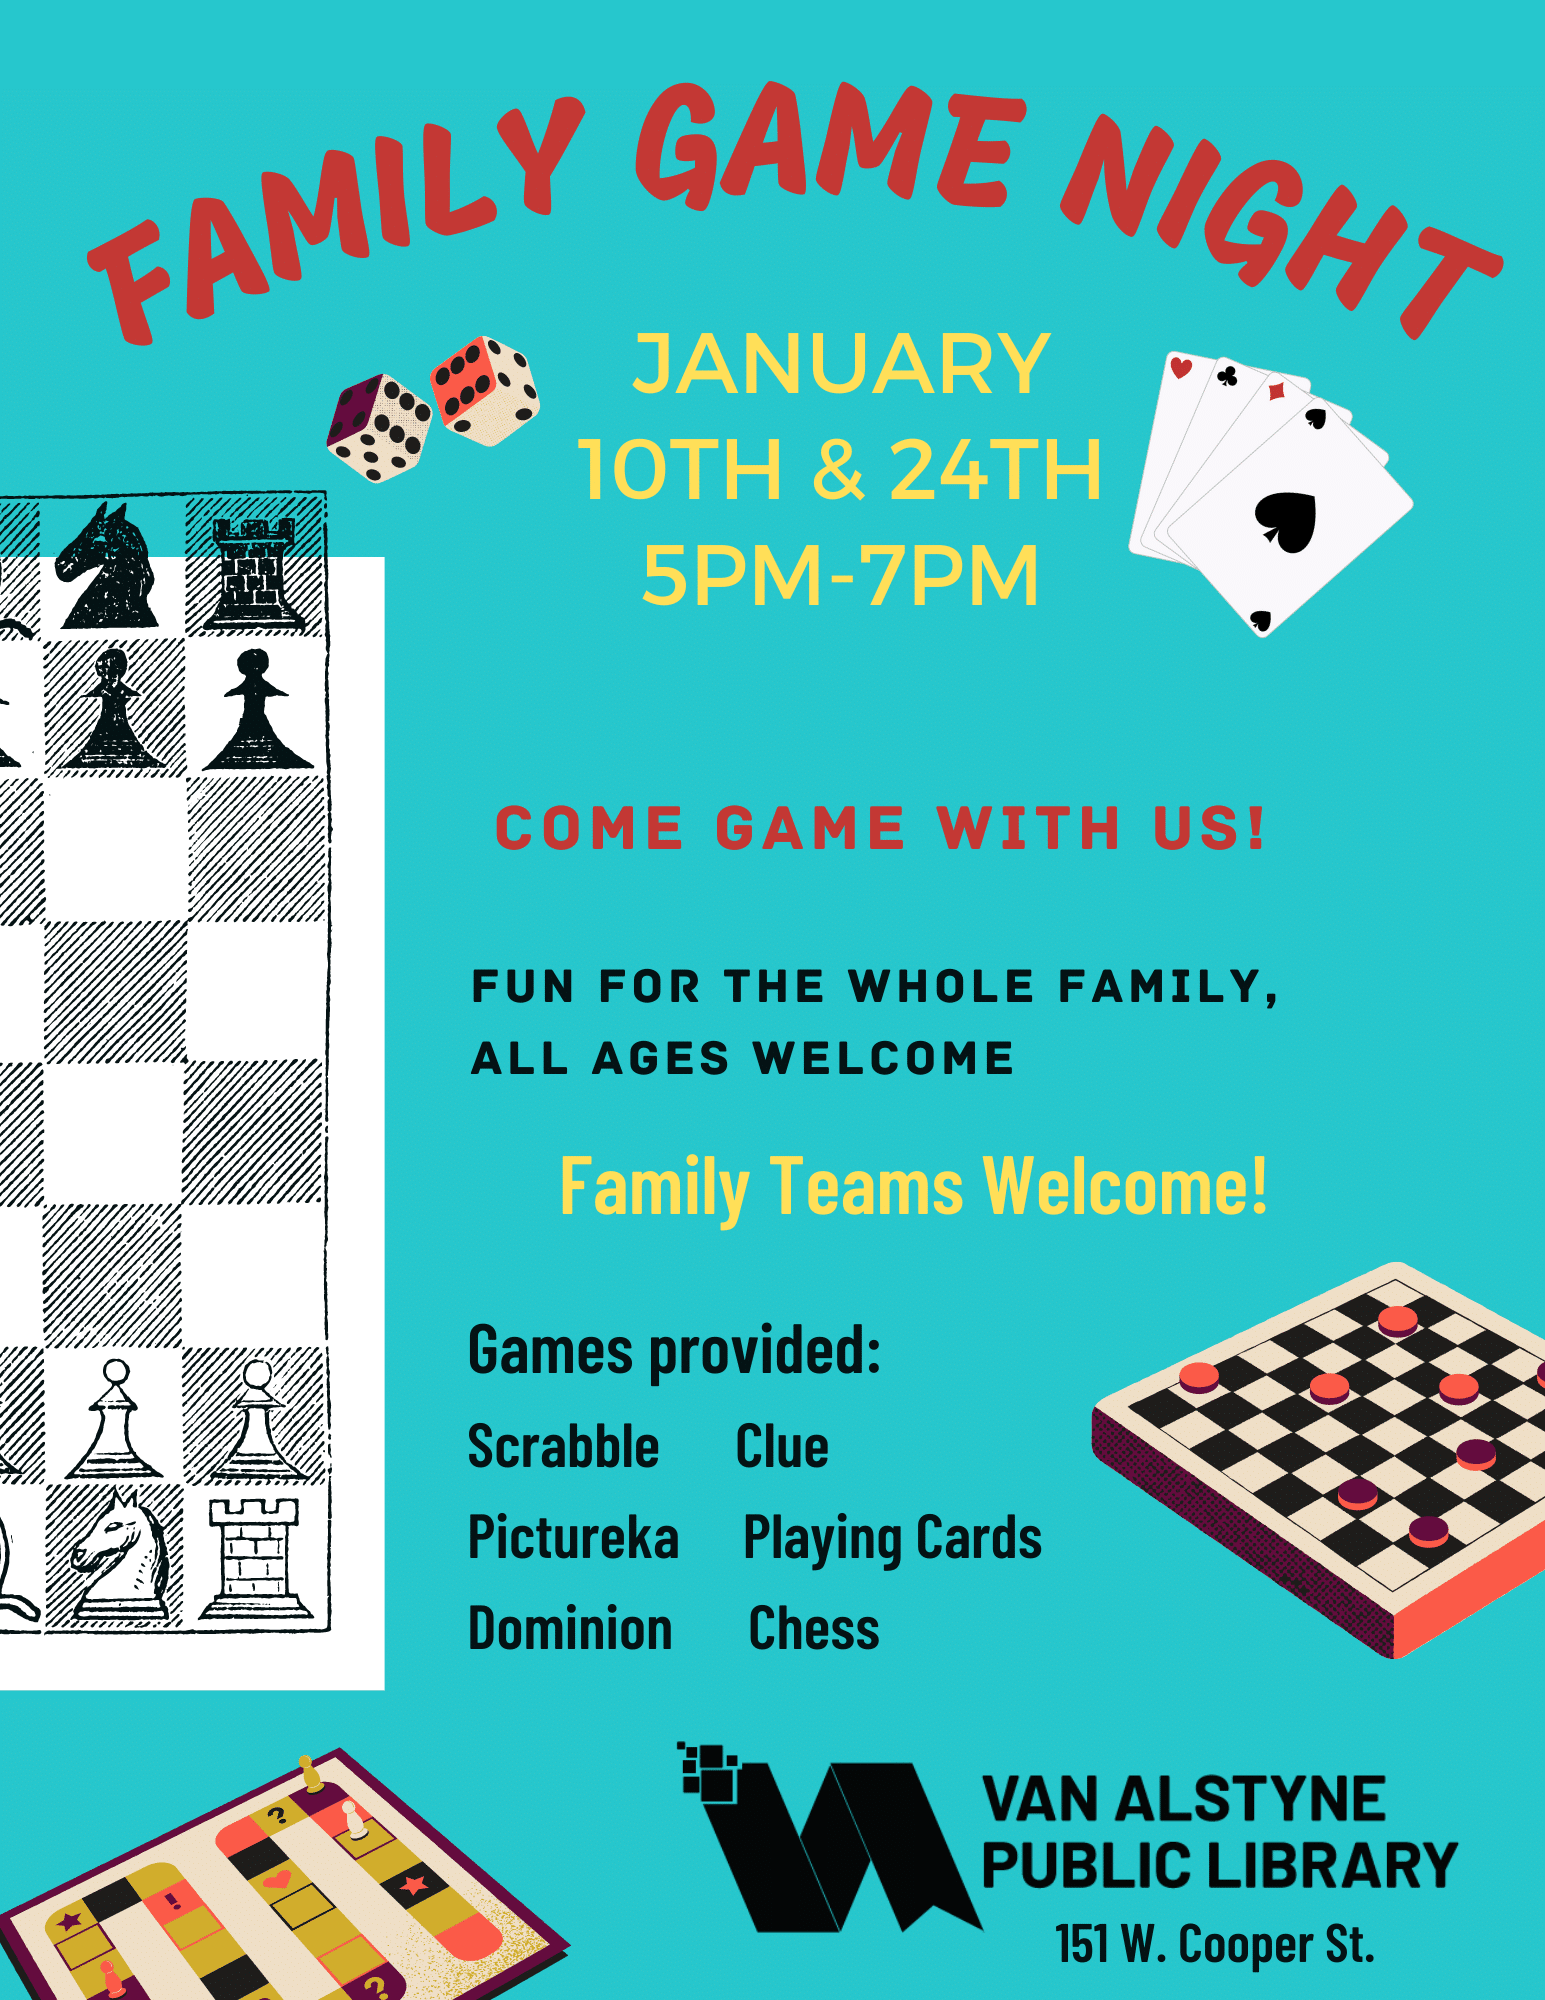 Family Game Night Tuesday 5-7pm at the Library!